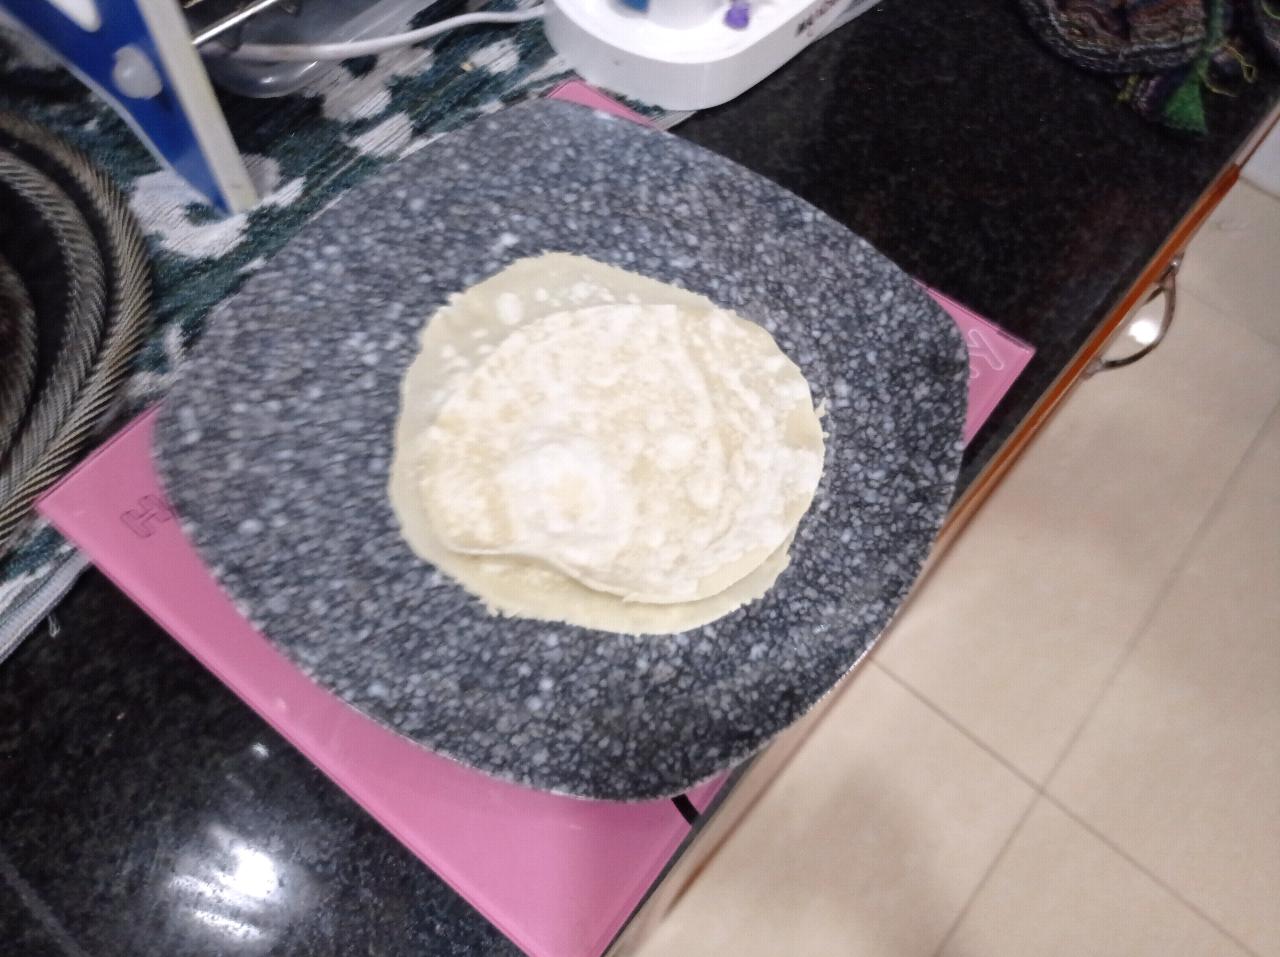 How to make #organic homemade flour #tortillas from scratch. #Taco Tuesday ready for #MemorialDay weekend on Monday, May 30, 2022 watching #DavisRomero 